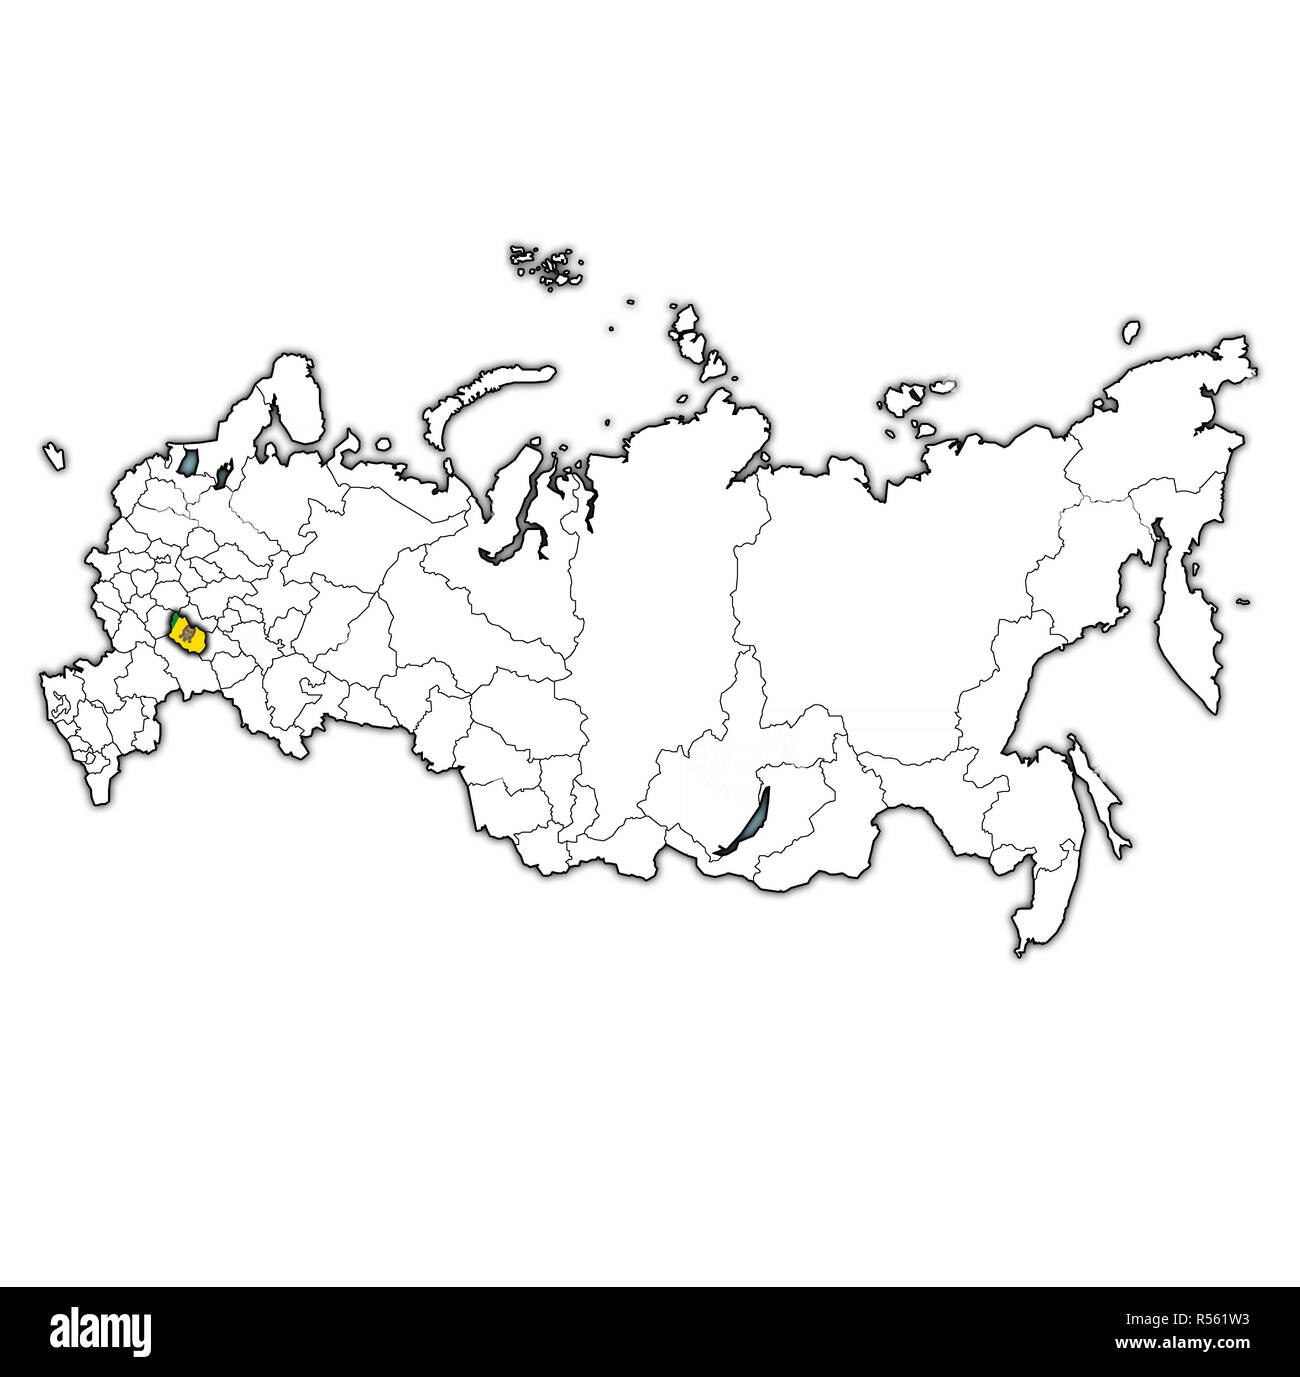 emblem of penza oblast on map with administrative divisions and borders of russia Stock Photo